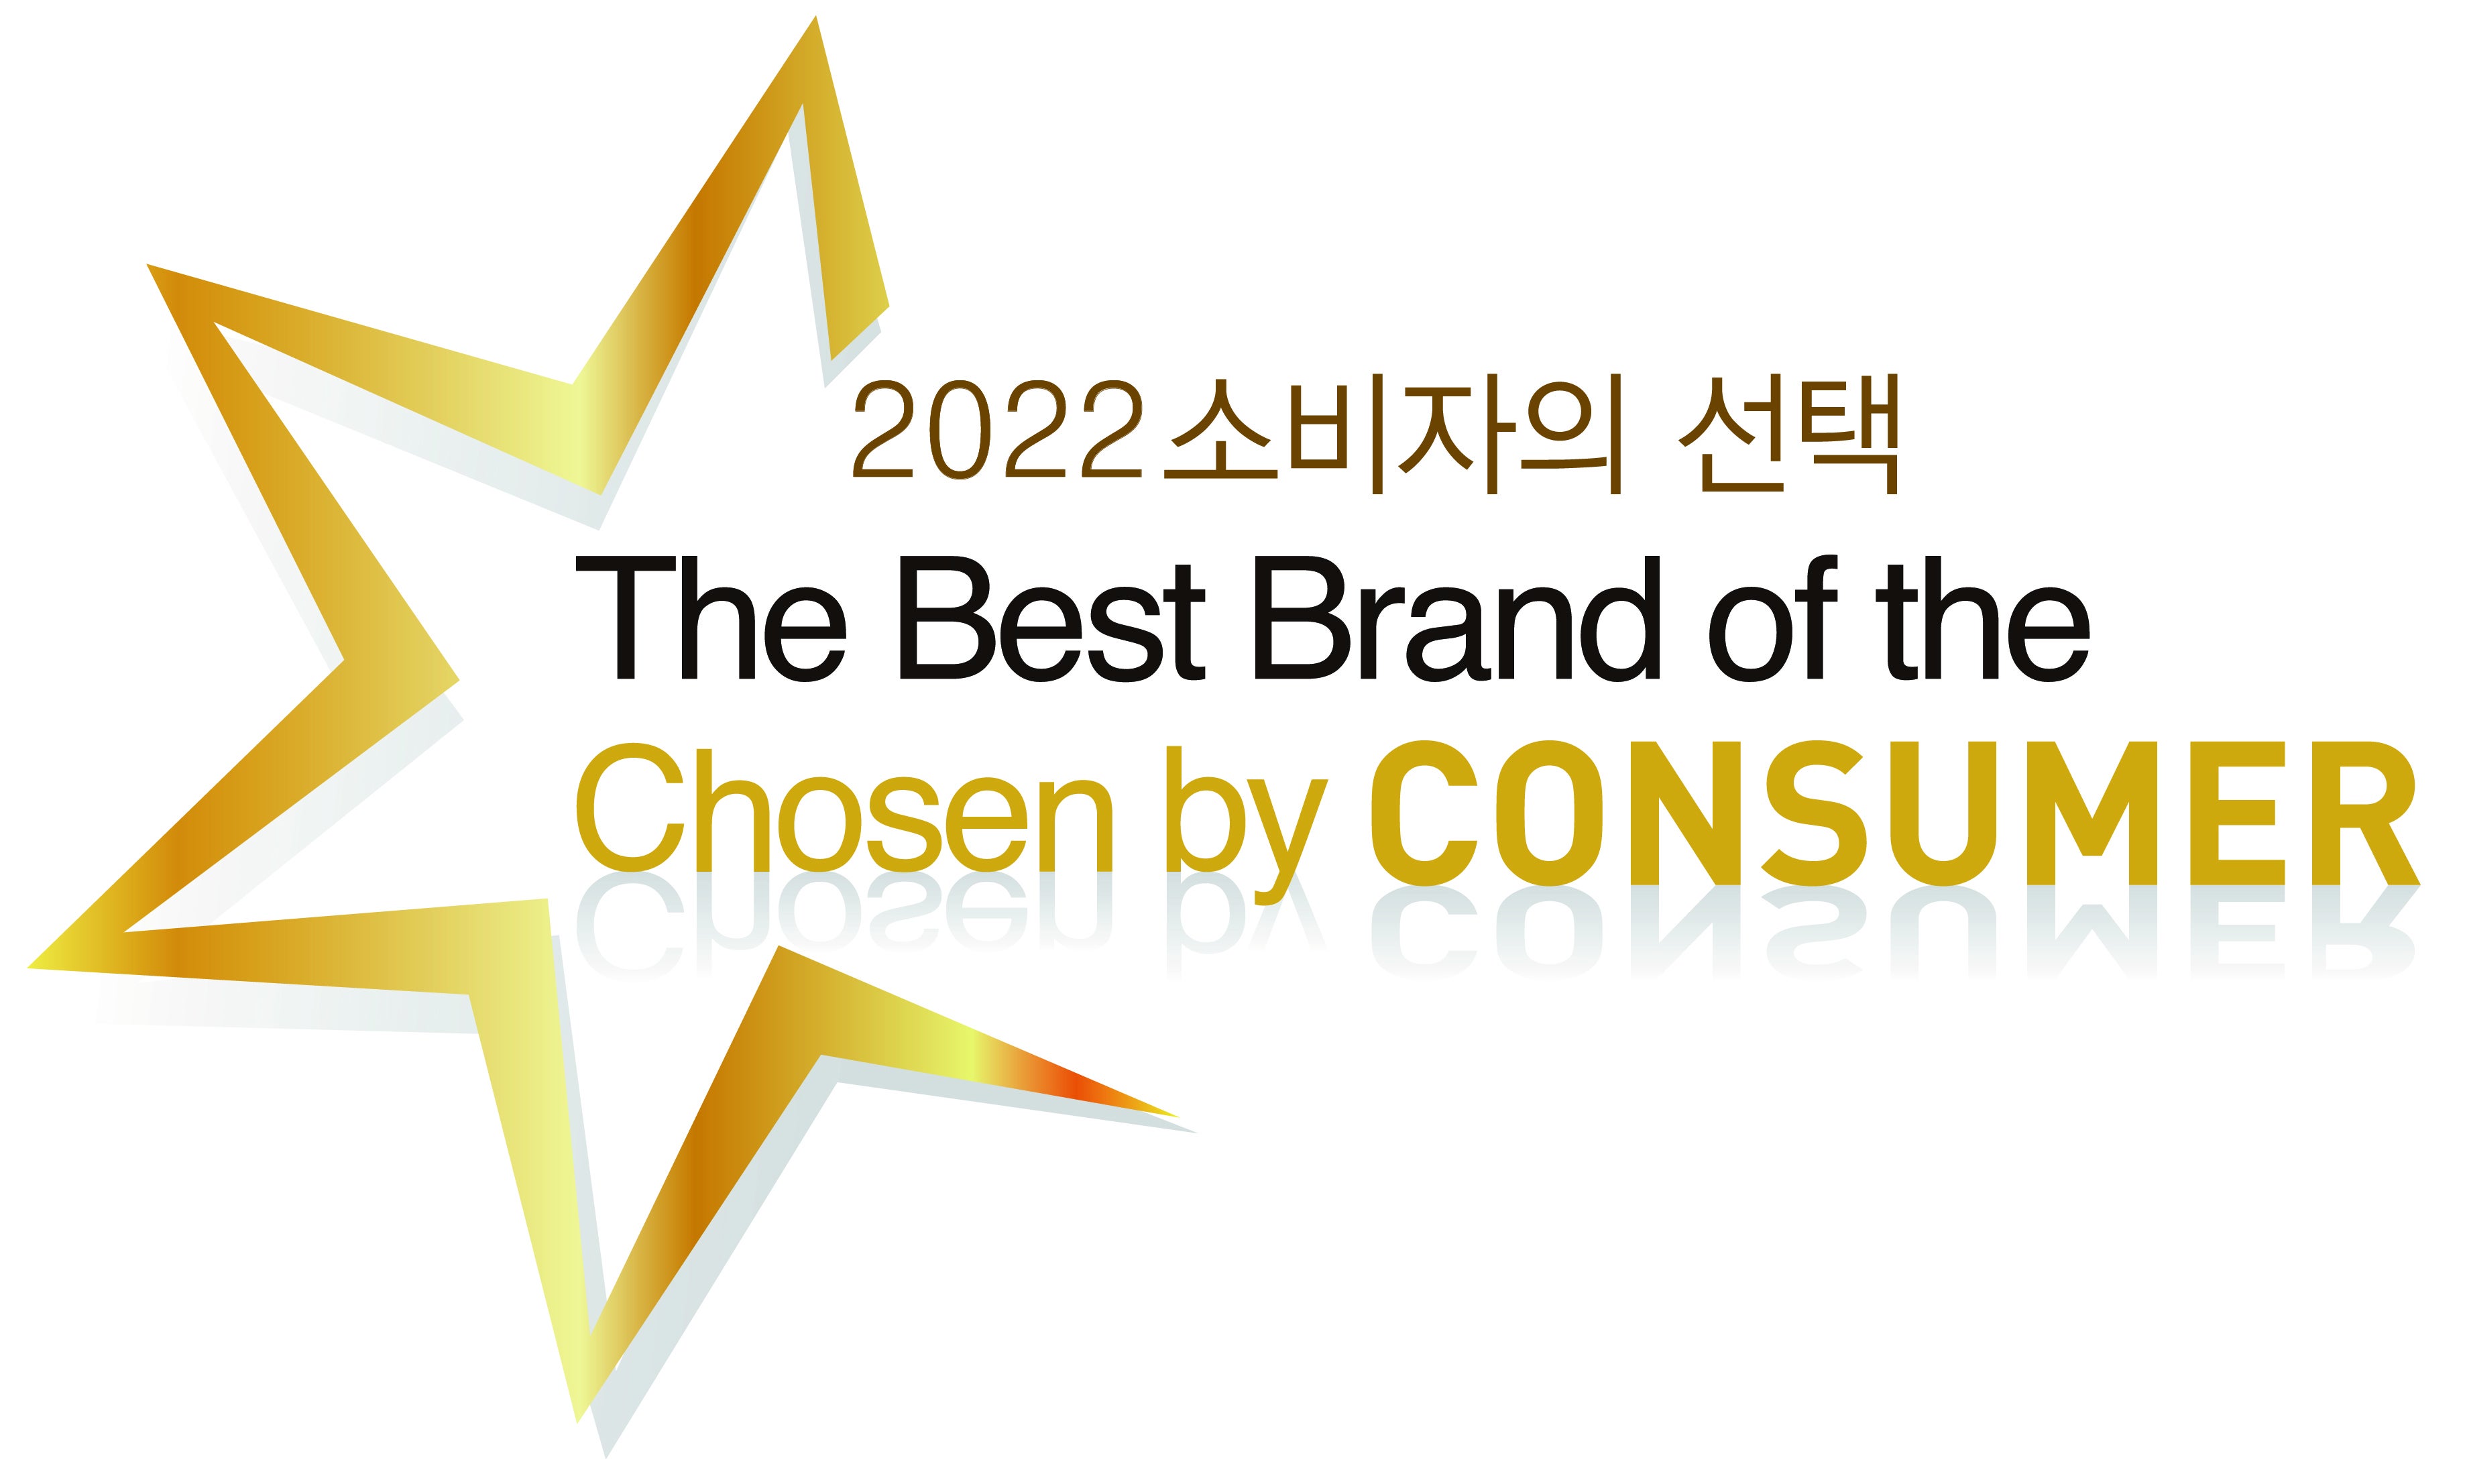 Robert Walters Korea awarded 2021 in the Global Recruitment Consulting Category for the third consecutive year 